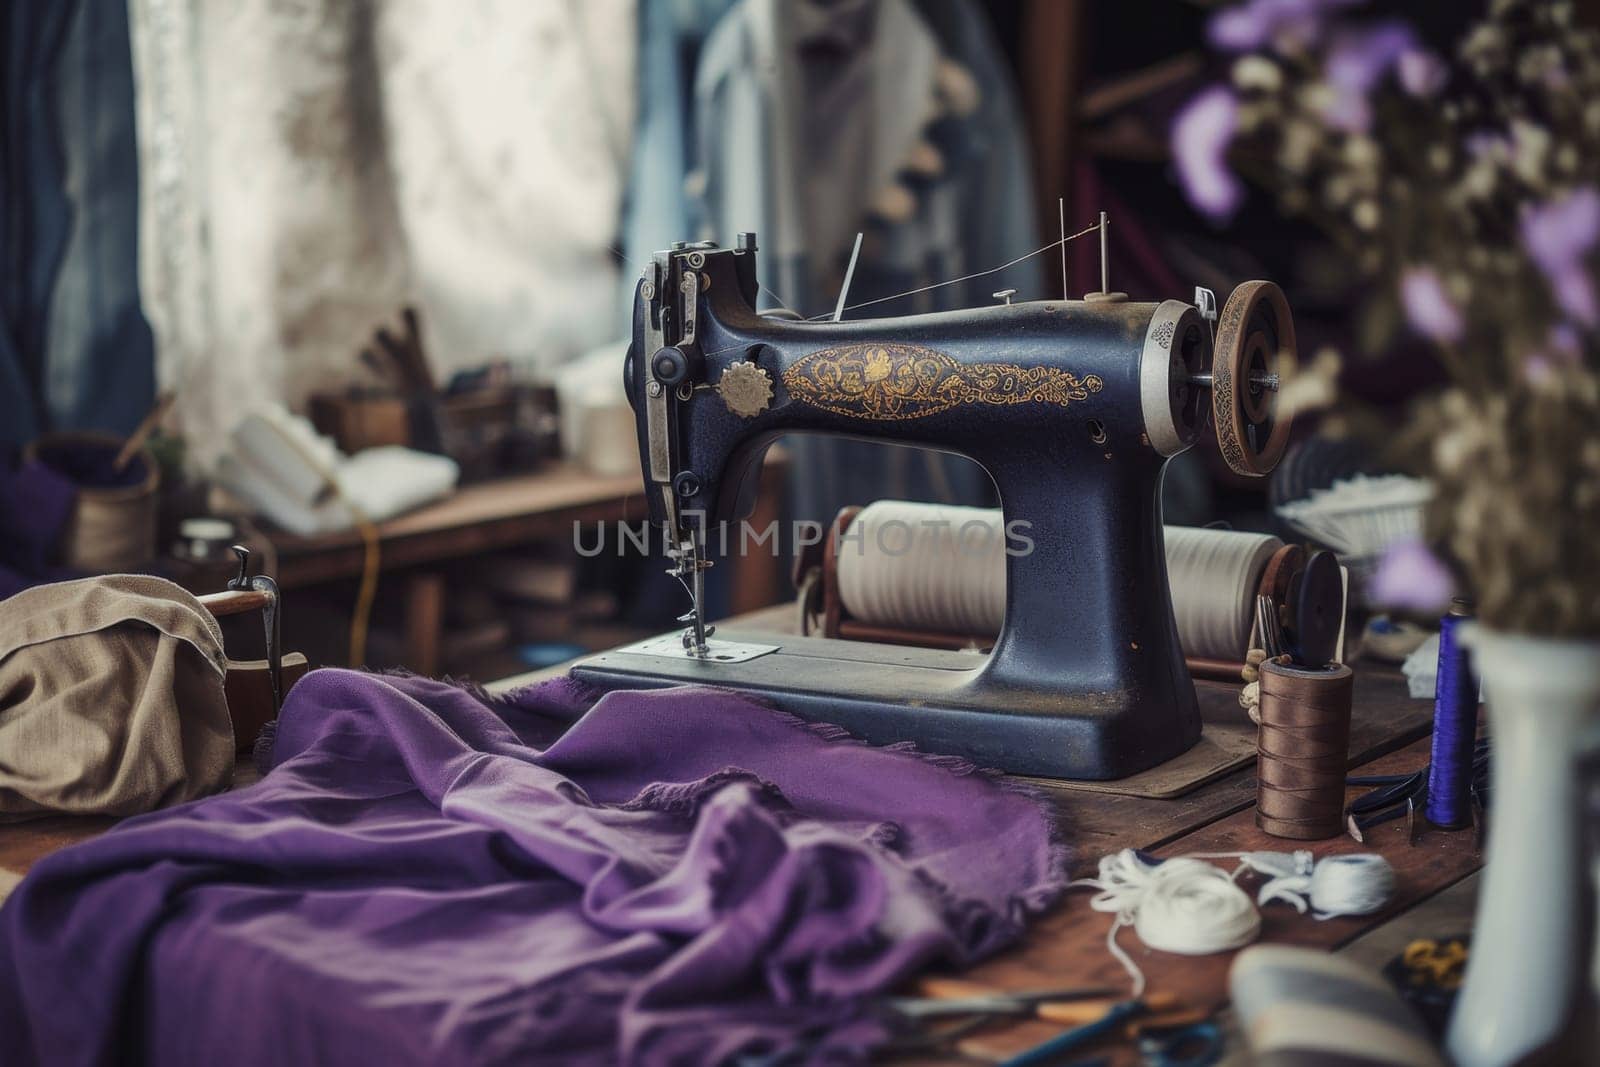 An antique sewing machine is ready to work on the table by Lobachad